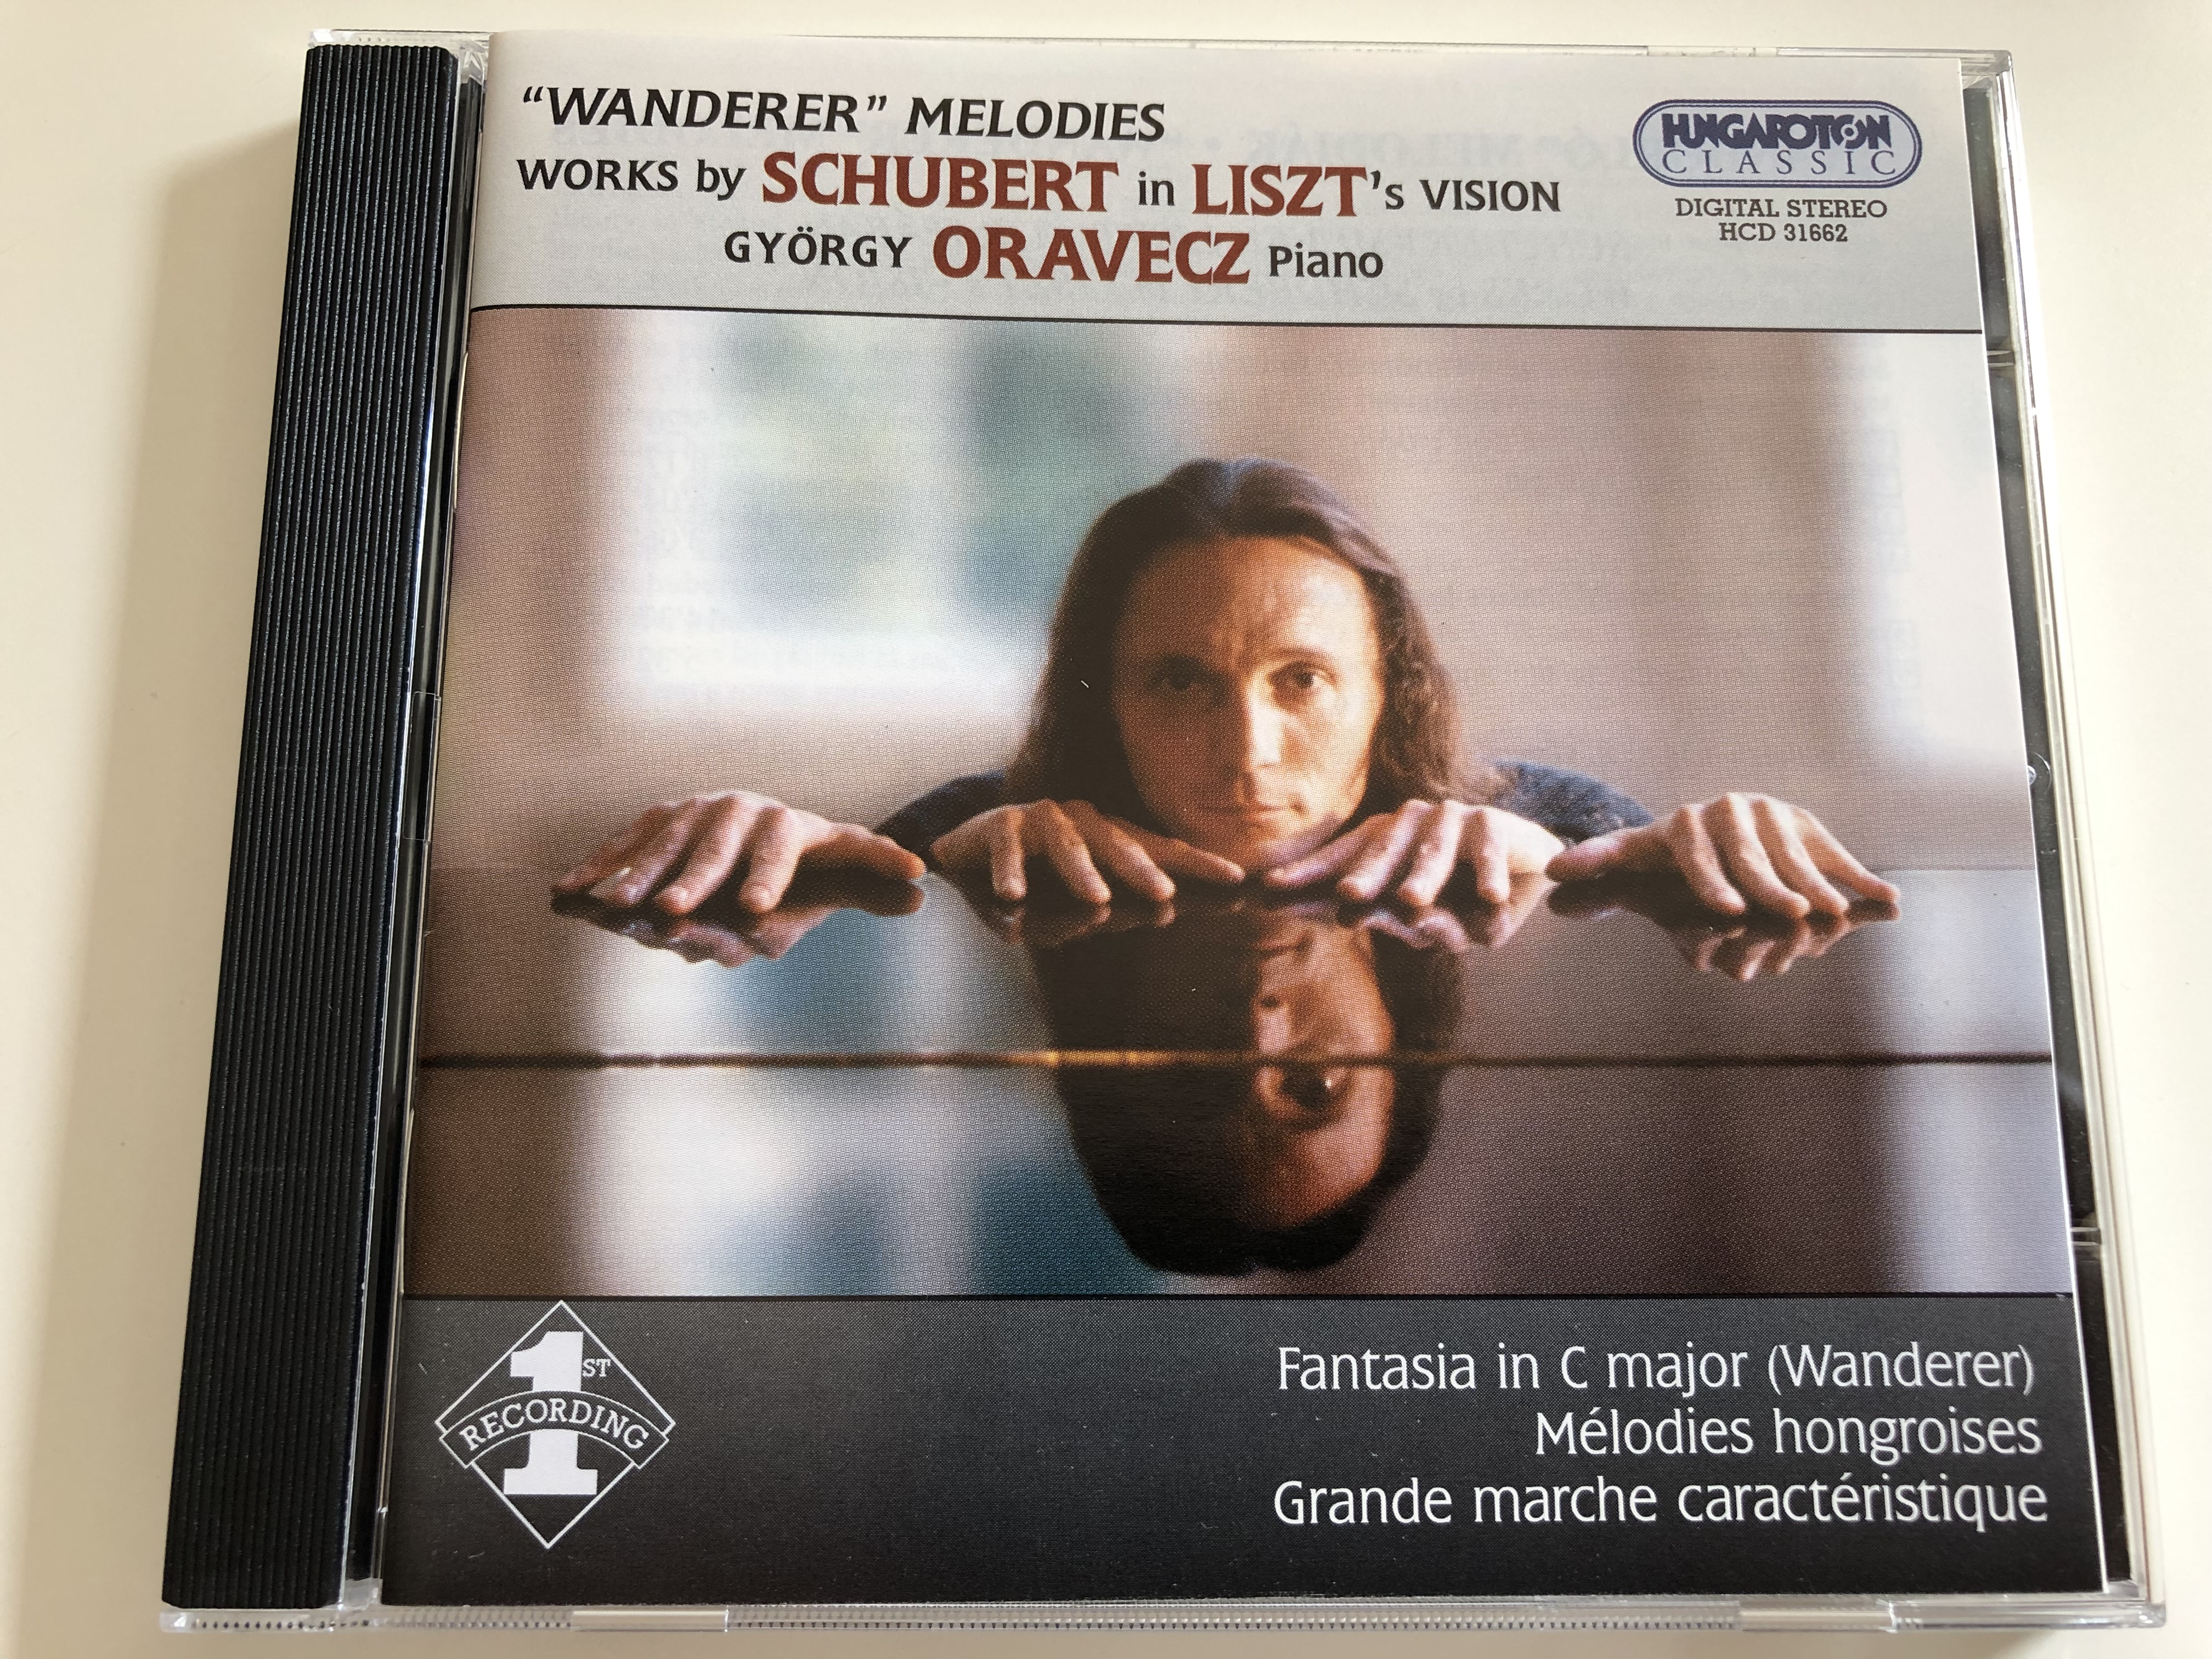 wanderer-melodies-works-by-schubert-in-liszt-s-vision-gy-rgy-oravecz-piano-fantasia-in-c-major-m-lodies-hongroises-grande-marche-caract-ristique-hungaroton-classic-audio-cd-2003-hcd-31662-1-.jpg